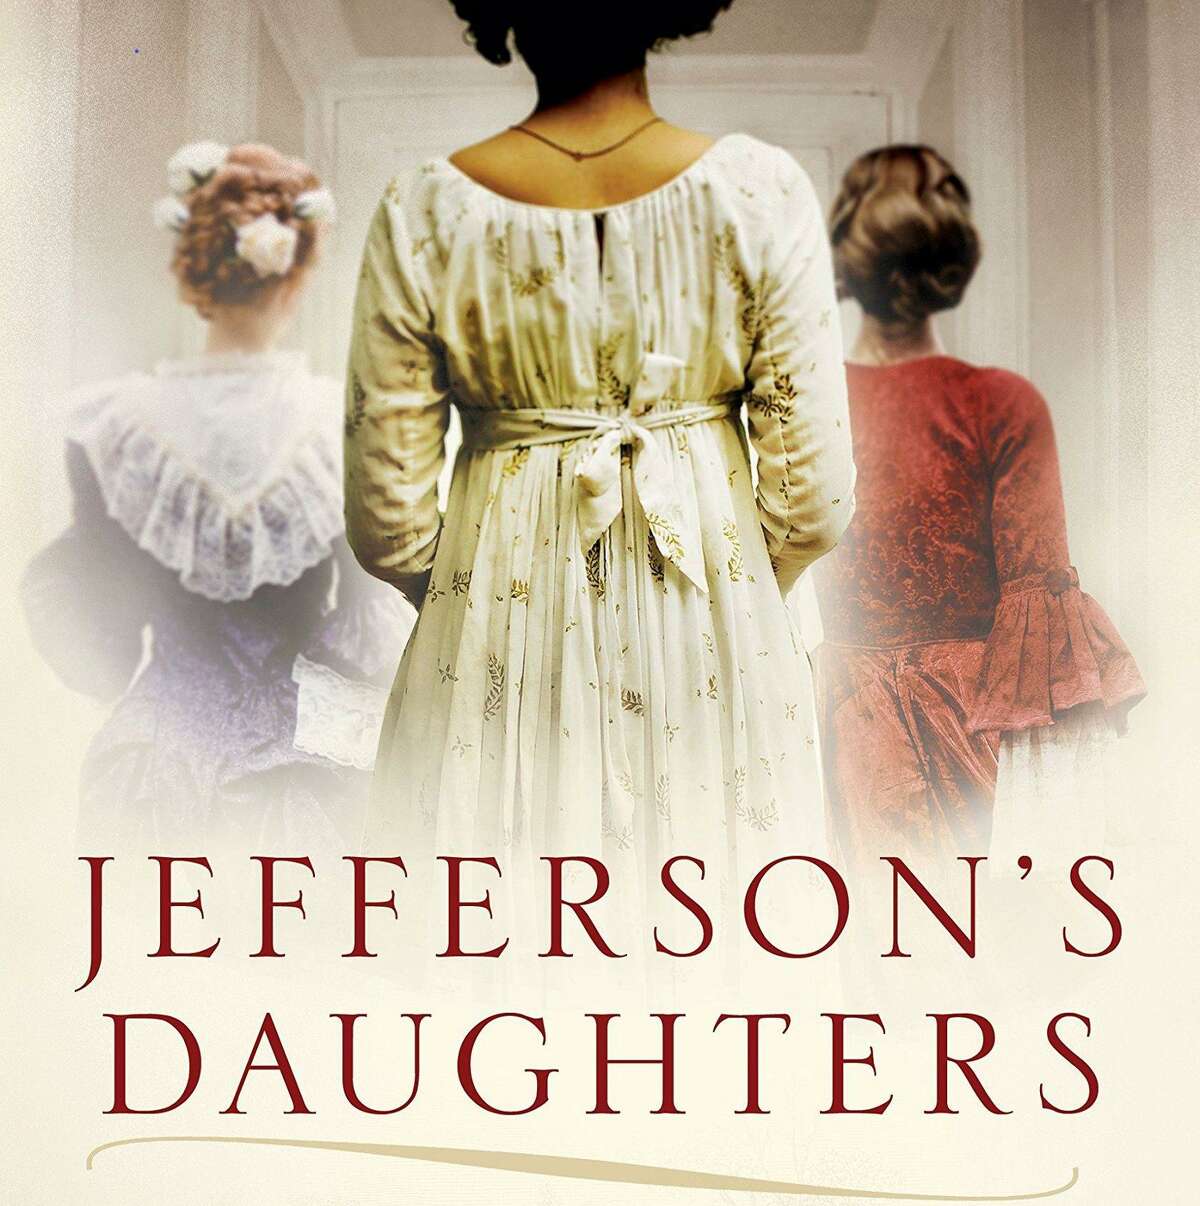 The History Book Club at the Museum of Fine Arts Houston presents free discussions about literature and art, and the public is invited. The book selection for January is Jefferson’s Daughters: Three Sisters, White and Black, in a Young America by Catherine Kerrison. To participate online via Zoom, register at https://us02web.zoom.us/meeting/register/tZApdOqoqTIuEtOHsmoWZJpAYcpXIZvEaxon or to attend in person, please register via email at jmilillo@mfah.org.